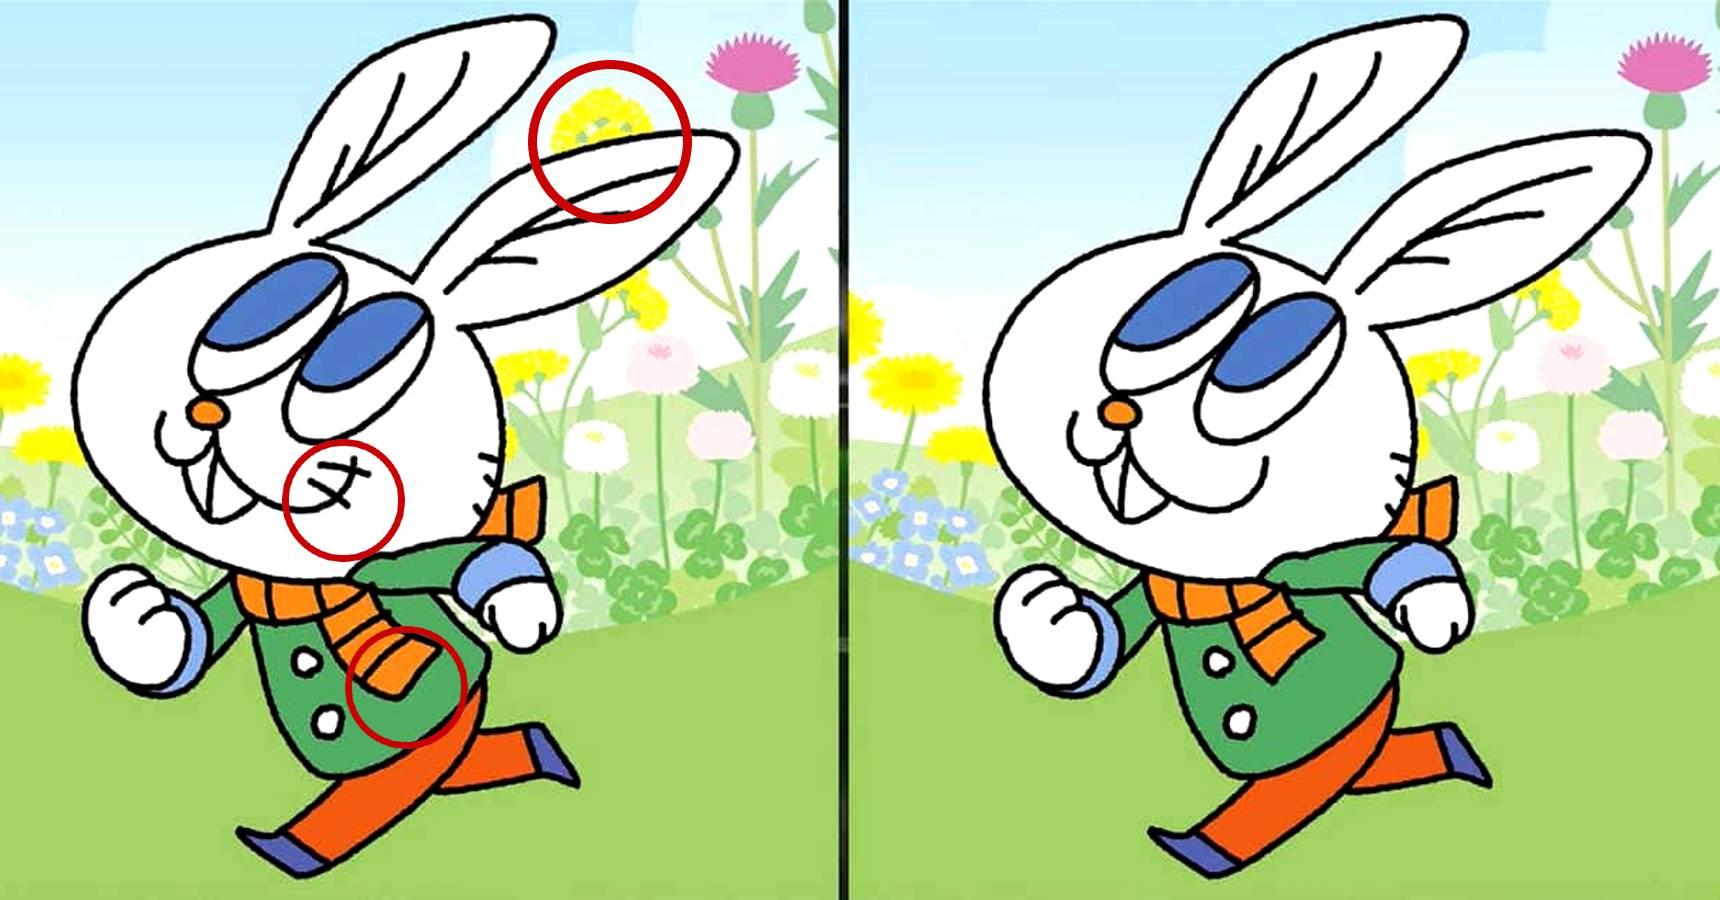 Brain teaser, Brain teaser rabbit, Brain teaser find the difference between the rabbits